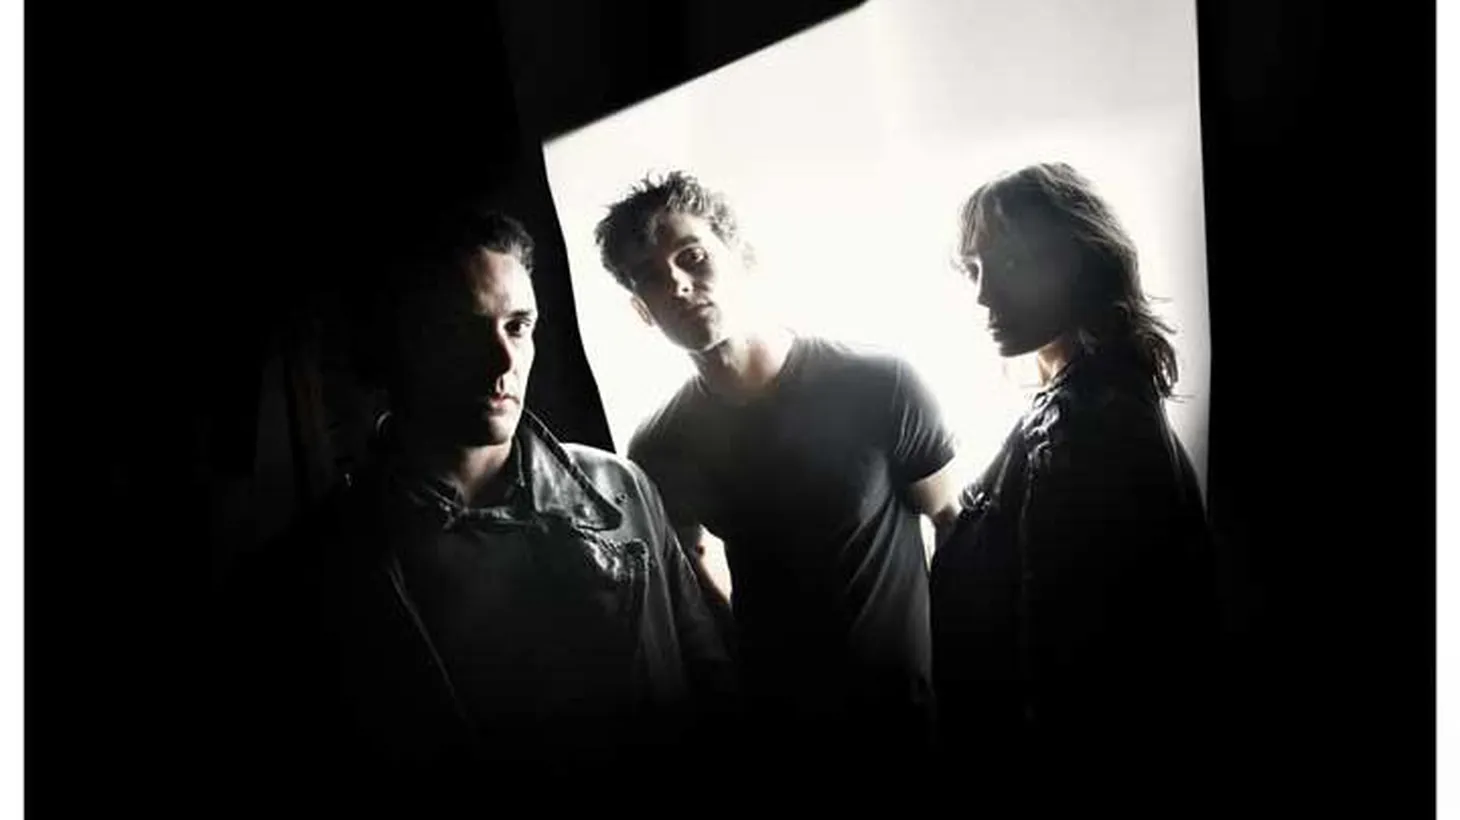 KCRW DJs were early champions of garage rockers Black Rebel Motorcycle Club and our love affair with their music has never faltered. We welcome the band back to our studios to play songs from their new album -- one of their best yet -- on Morning Becomes Eclectic at 11:15am.